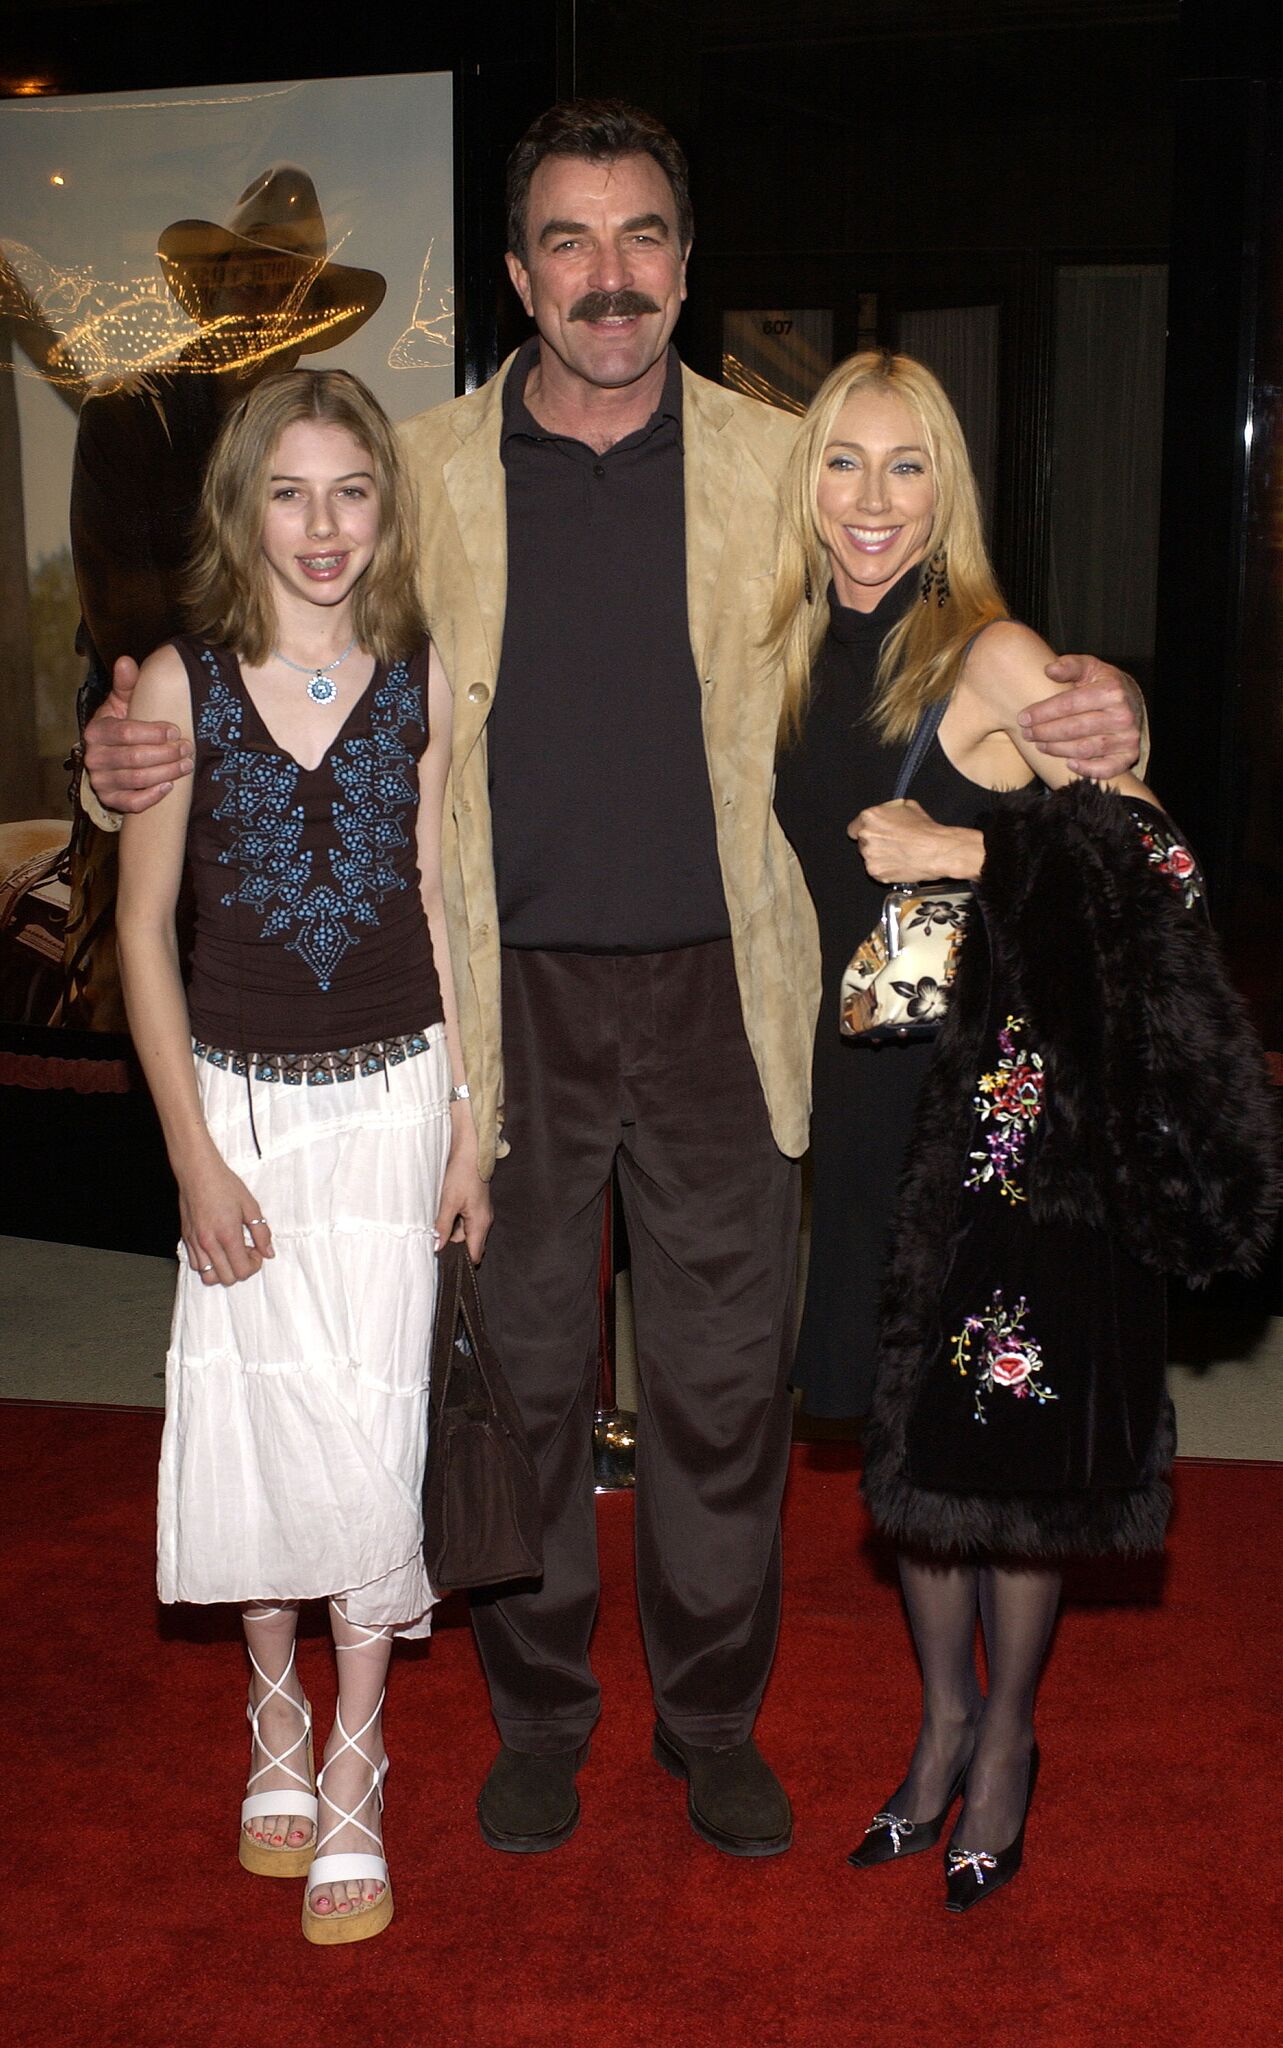 Hannah Selleck, Tom Selleck, and Jillie Mack at TNT's "Monte Walsh" premiere in Los Angeles on January 08, 2003 | Photo: Jean-Paul Aussenard/WireImage/Getty Images